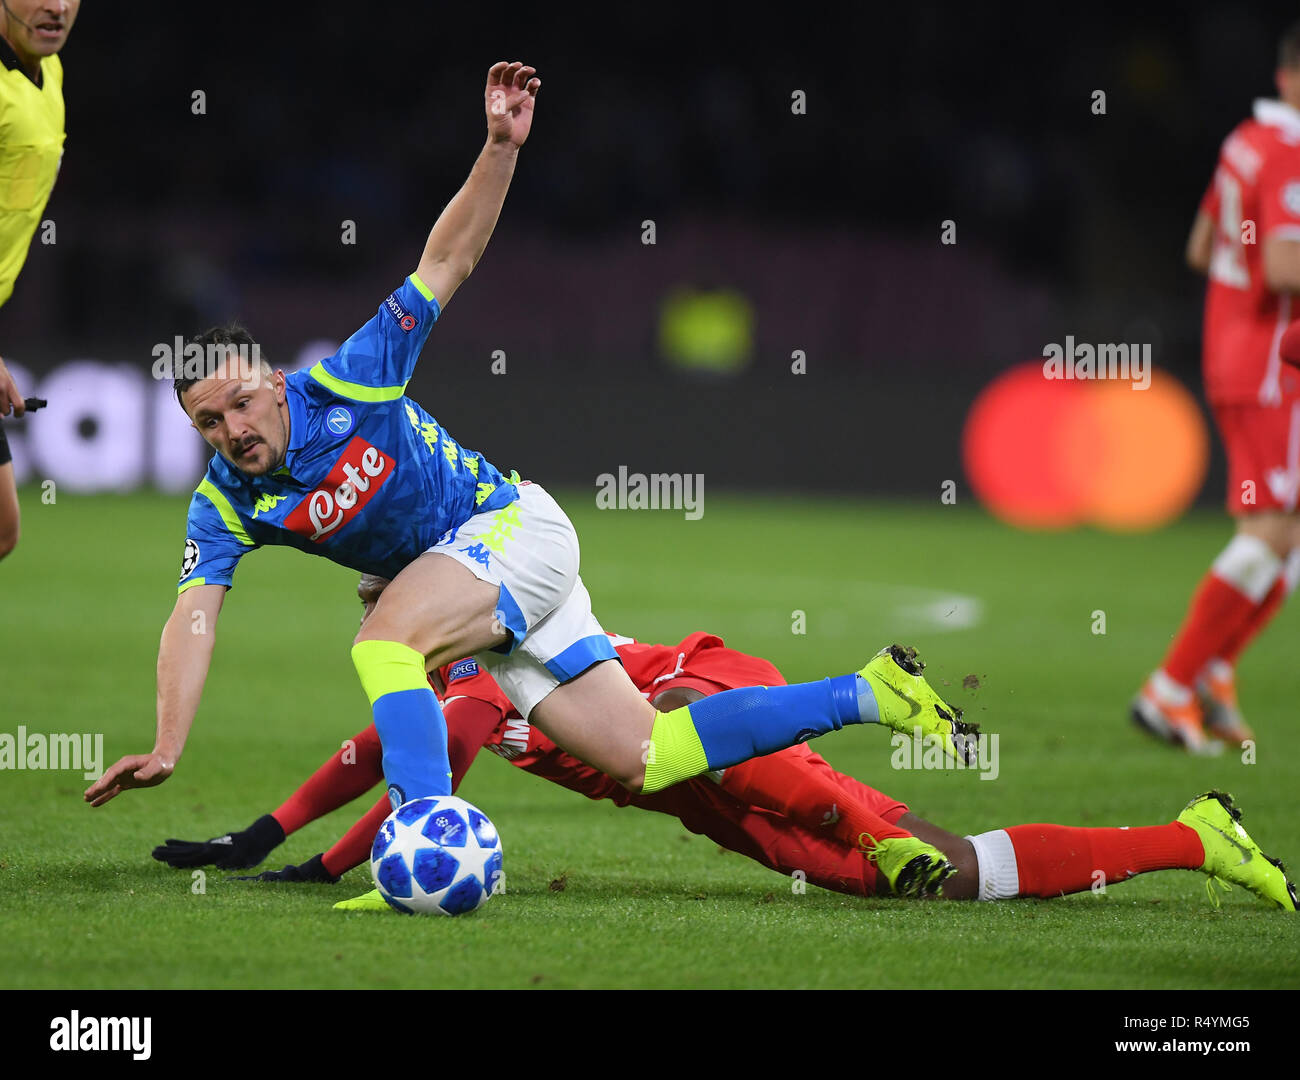 Naples, Italy. 28th Nov, 2018. Napoli's Mario Rui (L) vies with Red Star's Nabouhane Ben during the UEFA Champions League Group C match between Napoli and Red Star Belgrade in Naples, Italy, Nov. 28, 2018. Napoli won 3-1. Credit: Alberto Lingria/Xinhua/Alamy Live News Stock Photo